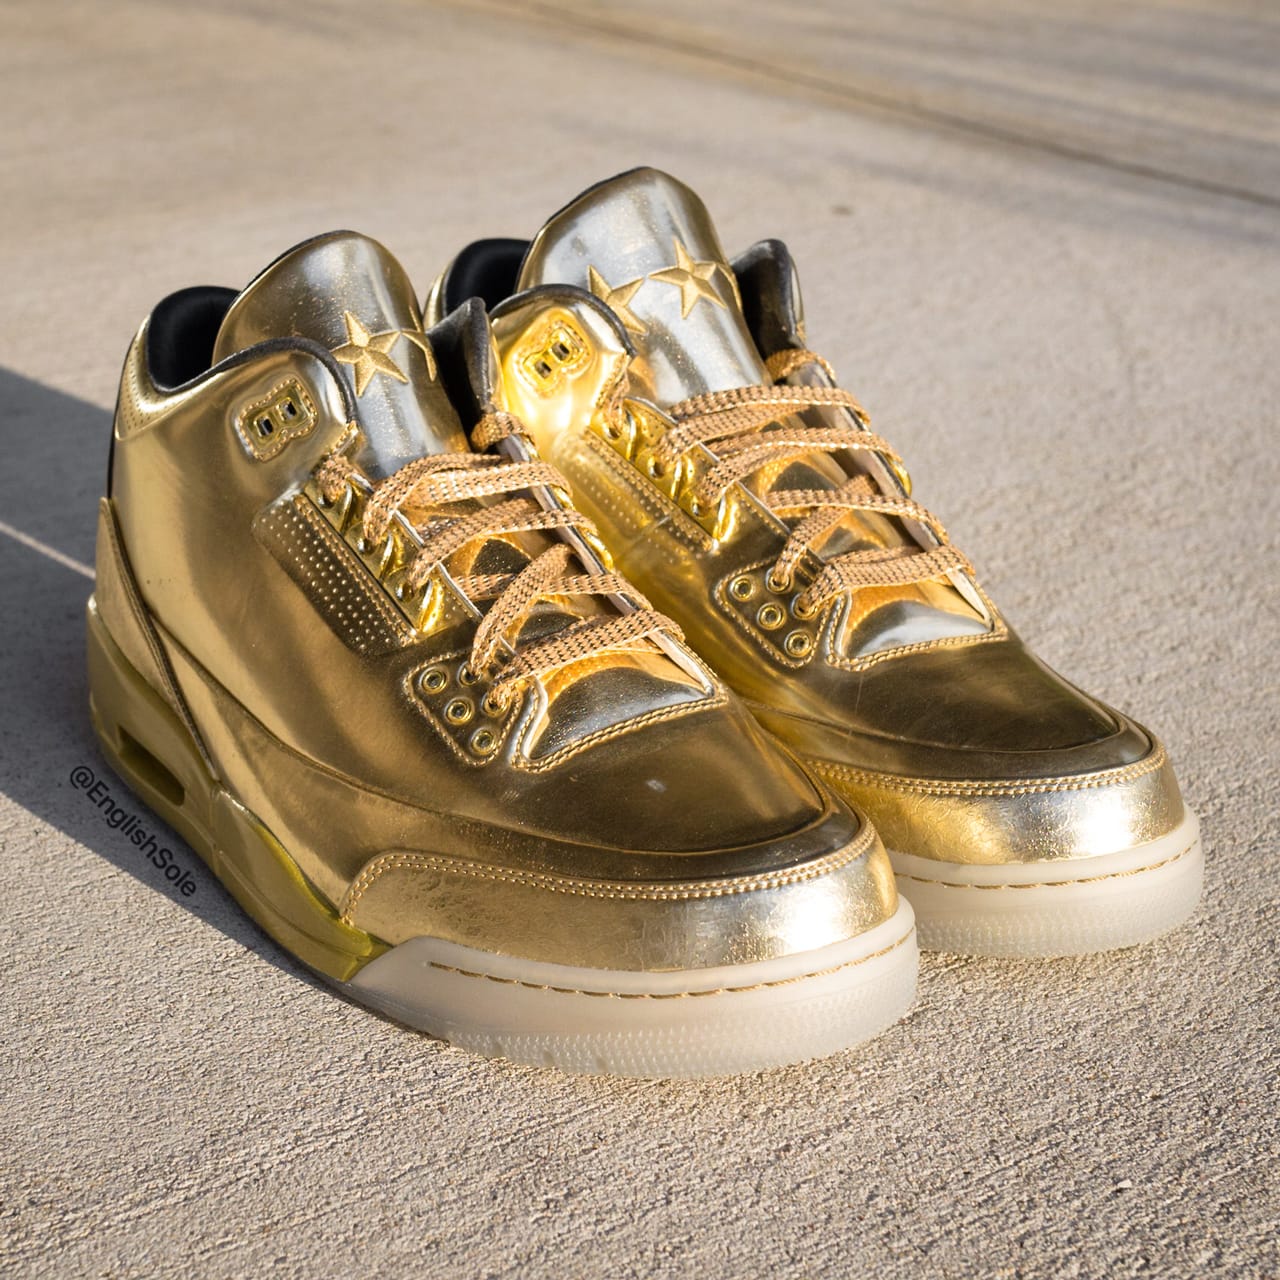 Check Out Usher's All Gold Air Jordan 3 